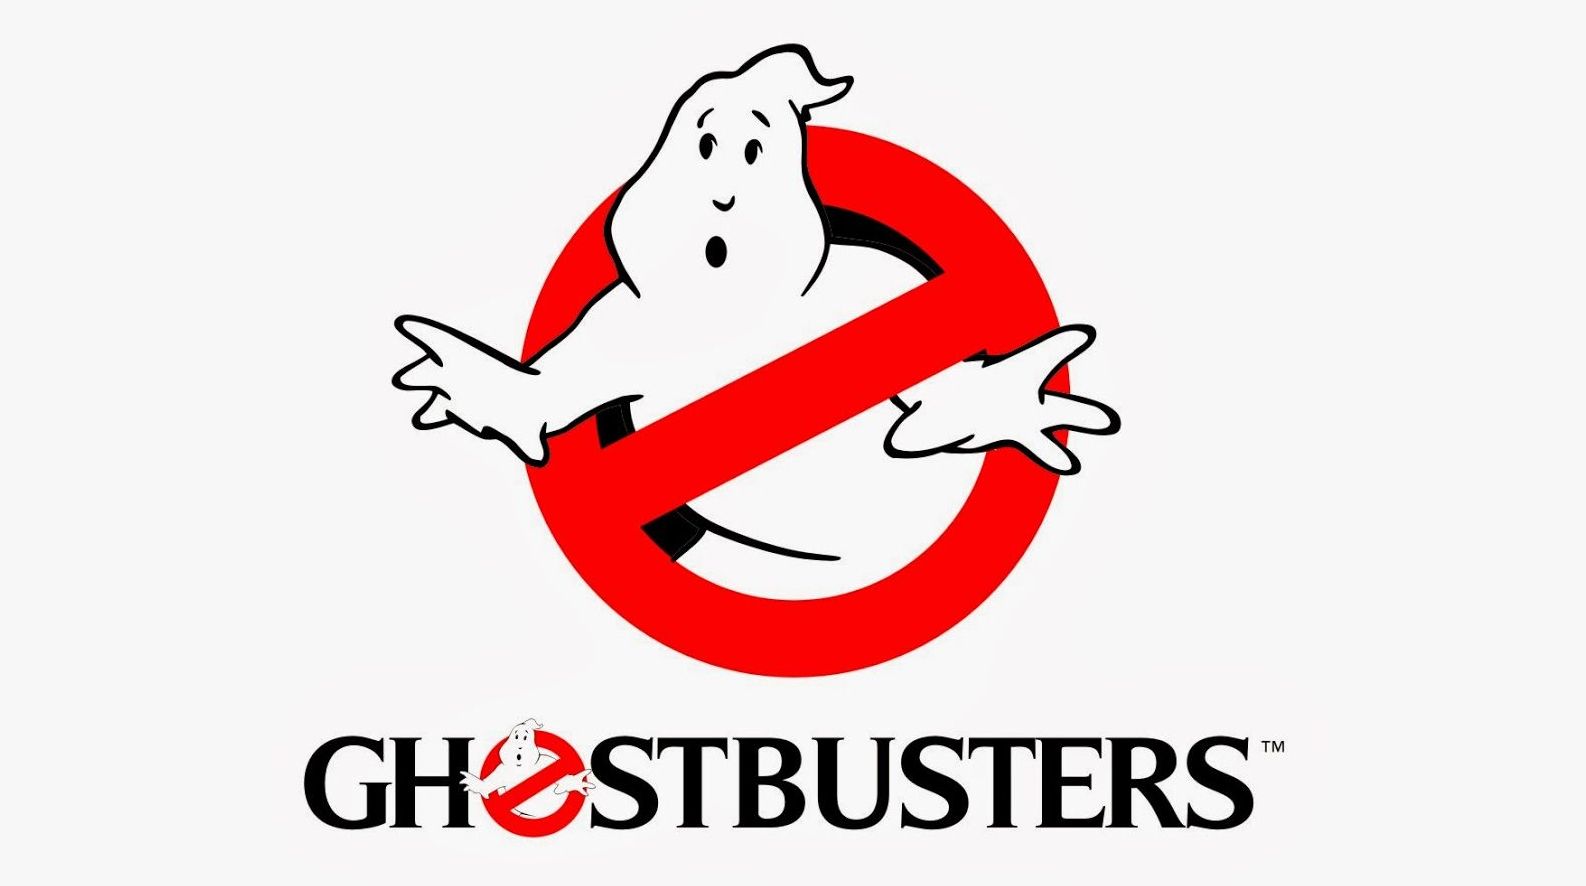 Sony Continues to Develop Extended Ghostbusters Franchise